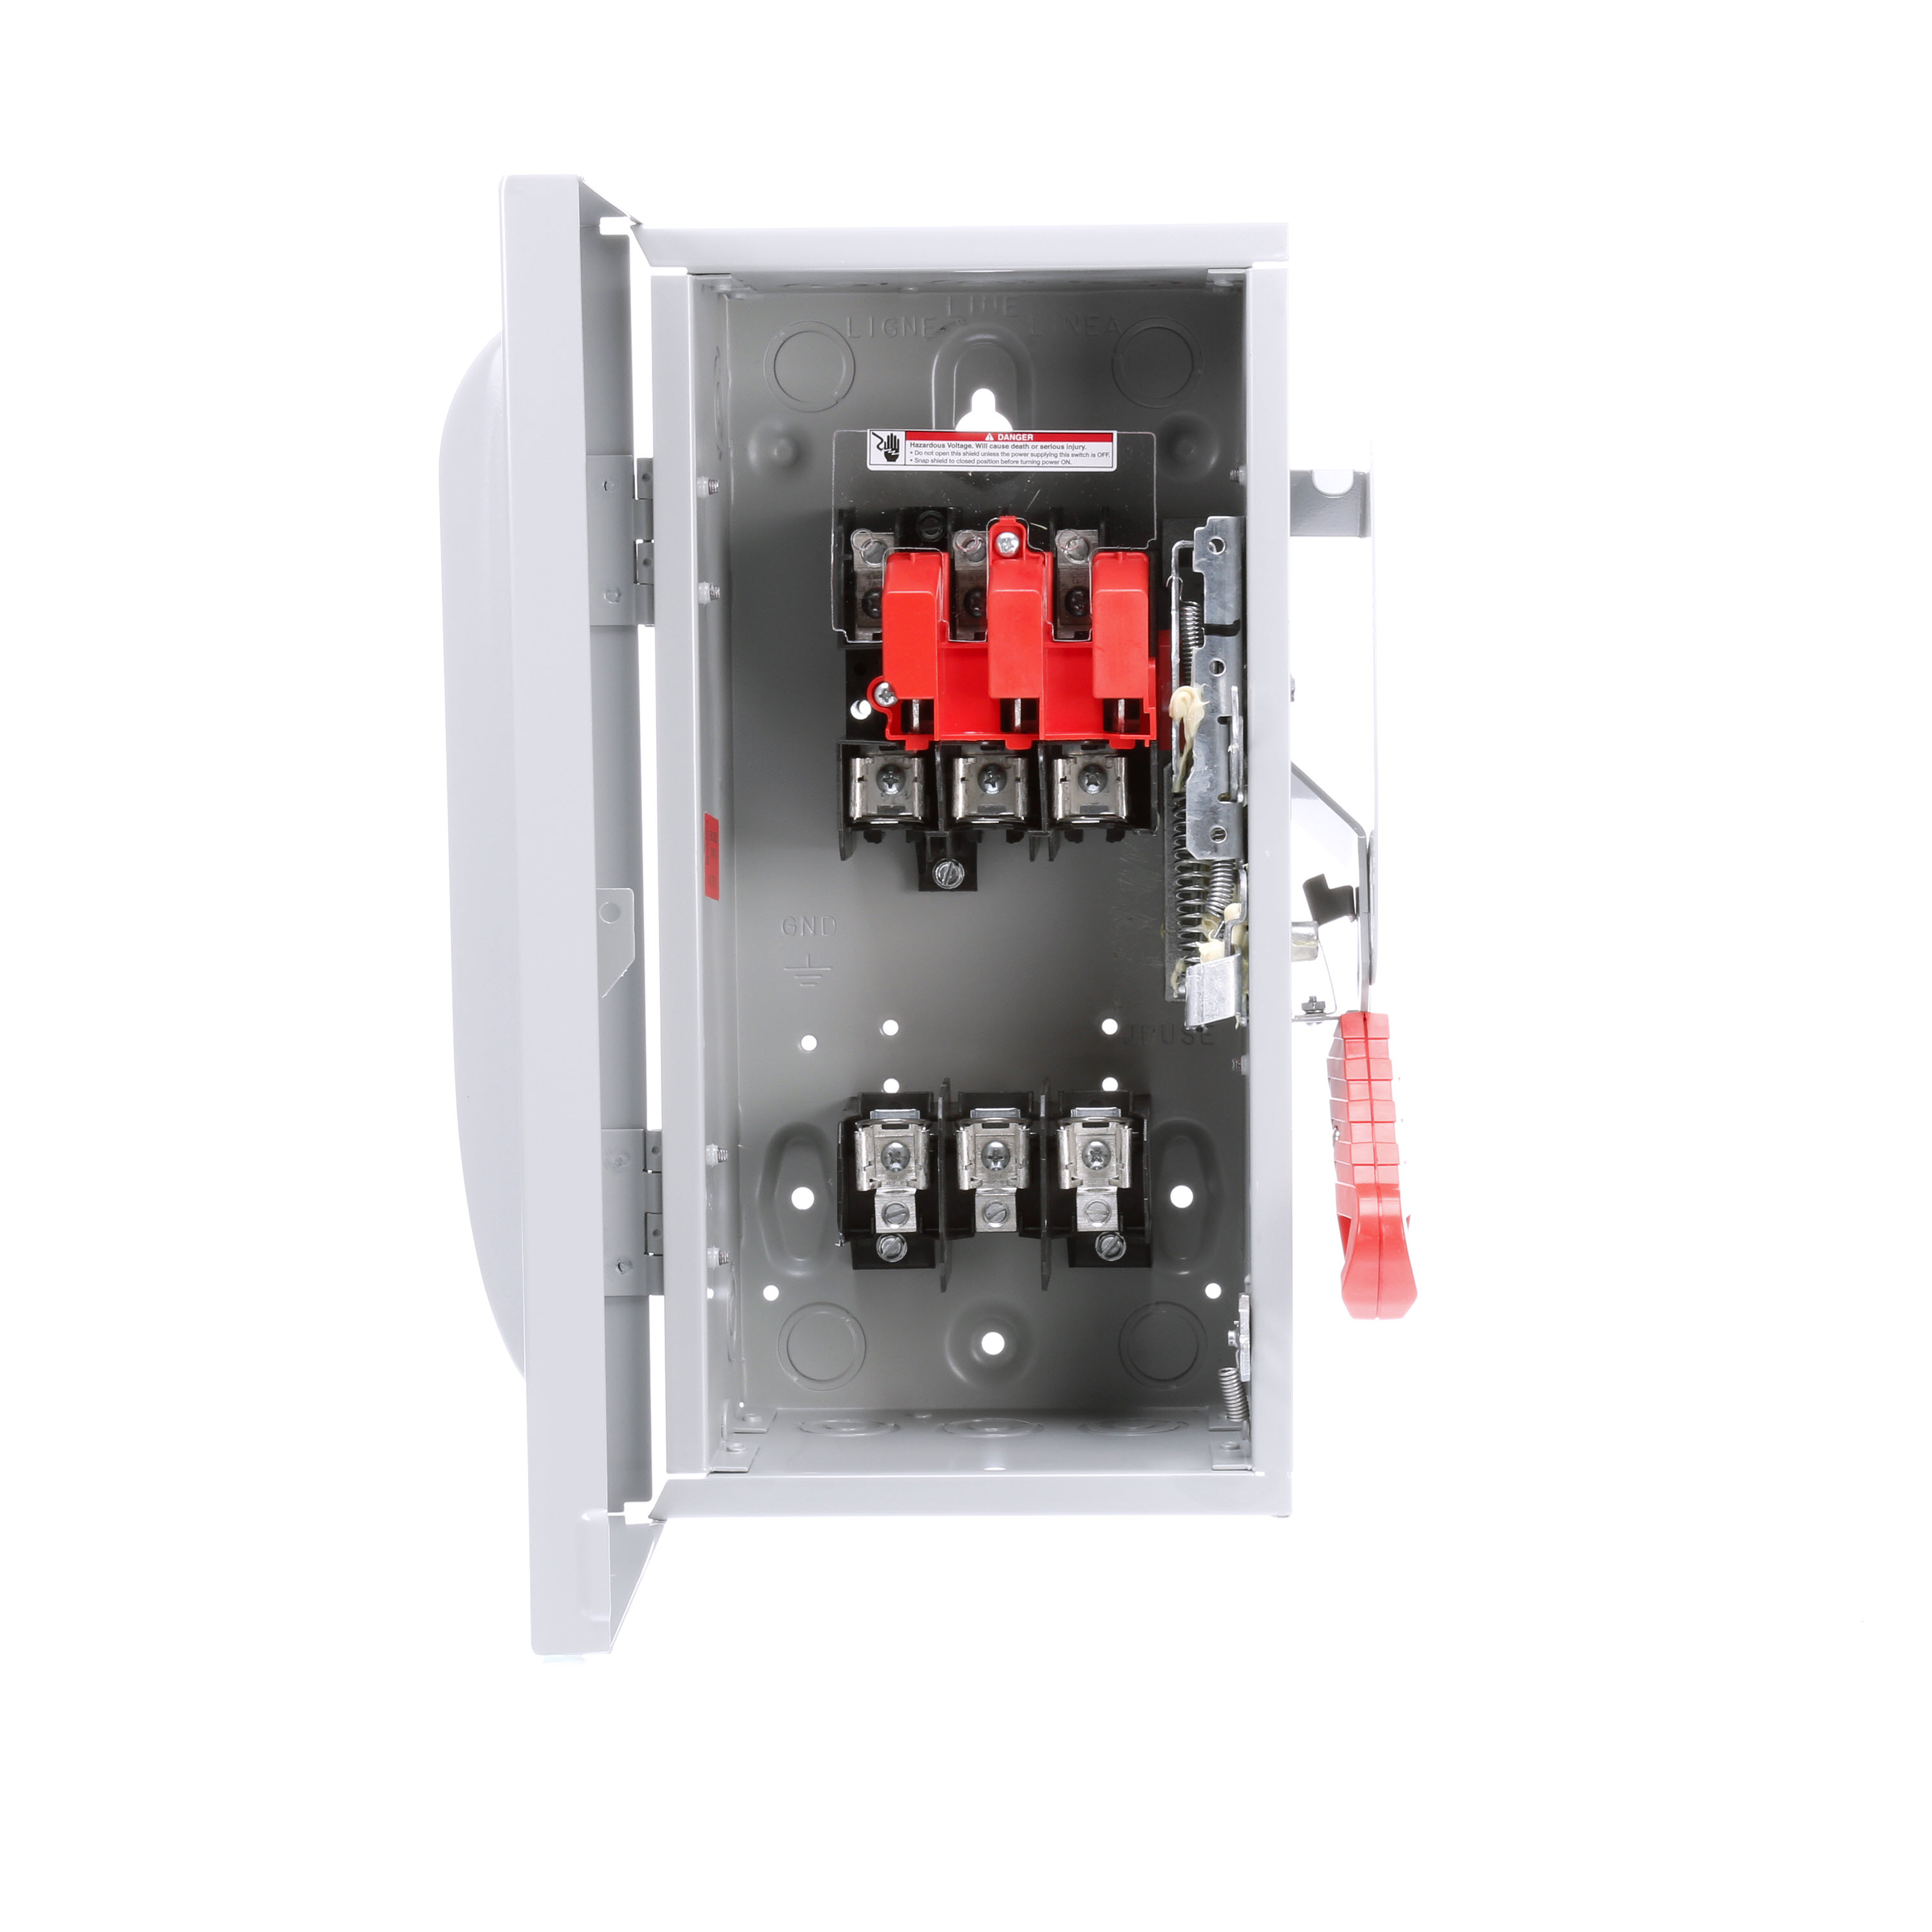 Siemens Low Voltage Circuit Protection Heavy Duty Safety Switches. Type ENCLOSED, SAFETY SWITCH Std UL V. Rating 600V A. Rating 30A Wattage 3W No. Of Poles 3P F. Rating 60Hz Action SINGLE THROW Material STEEL Enclosure TYPE 1. 2-3 point mounting holes. O. Cycles 10000 O. Temperature (-20F-120F) AMBIENT TEMPERATURE Environmental Conditions INDOOR